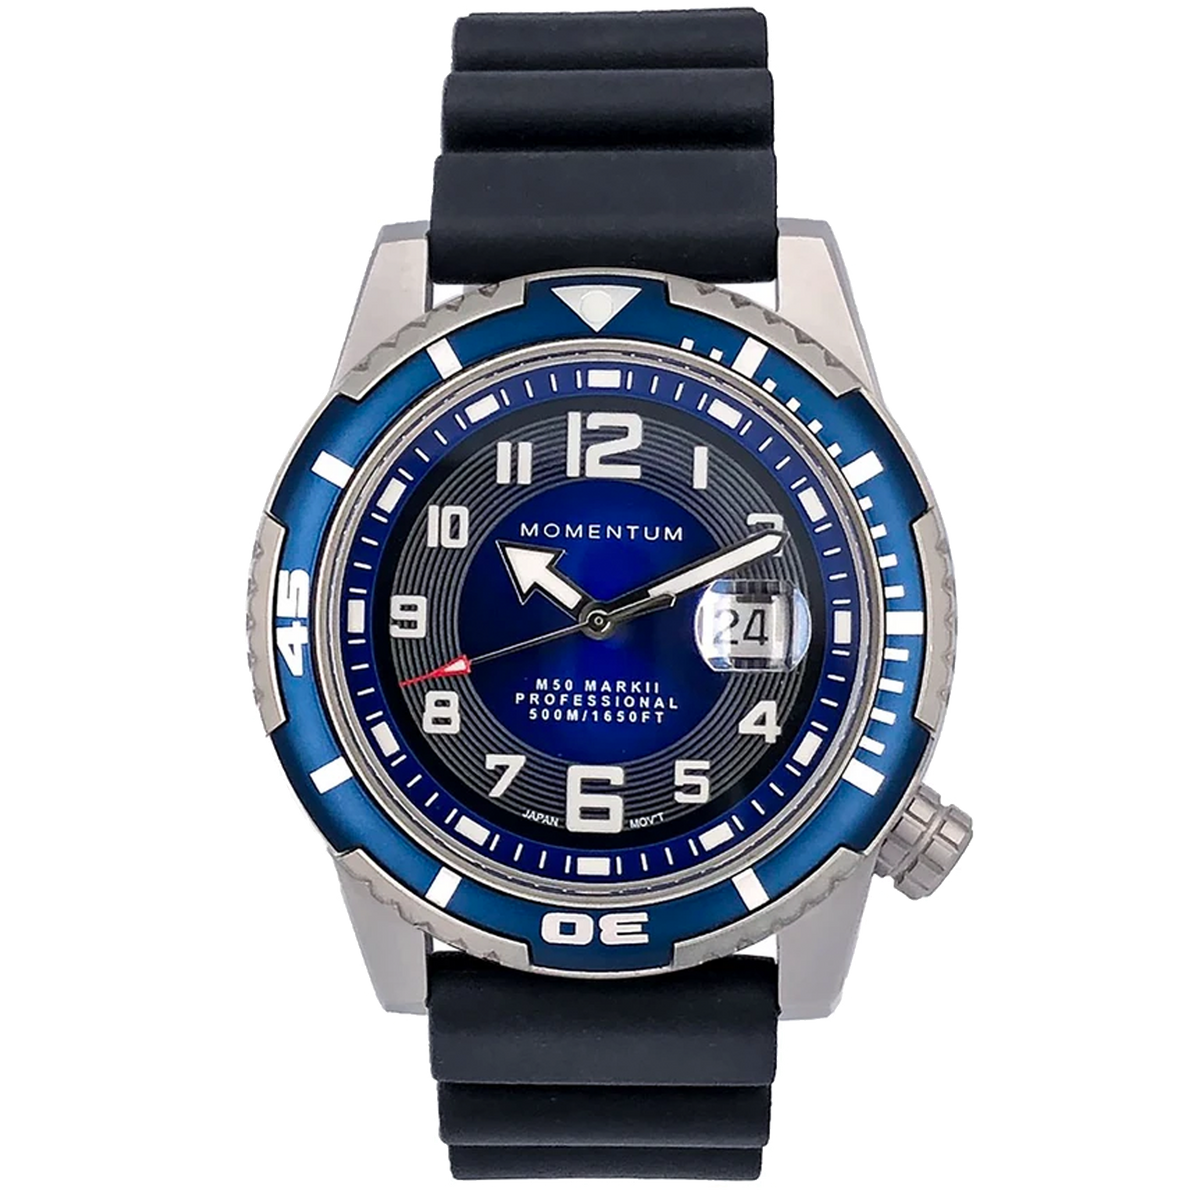 Momentum Watch - M50 Military Dive - Blue Dial